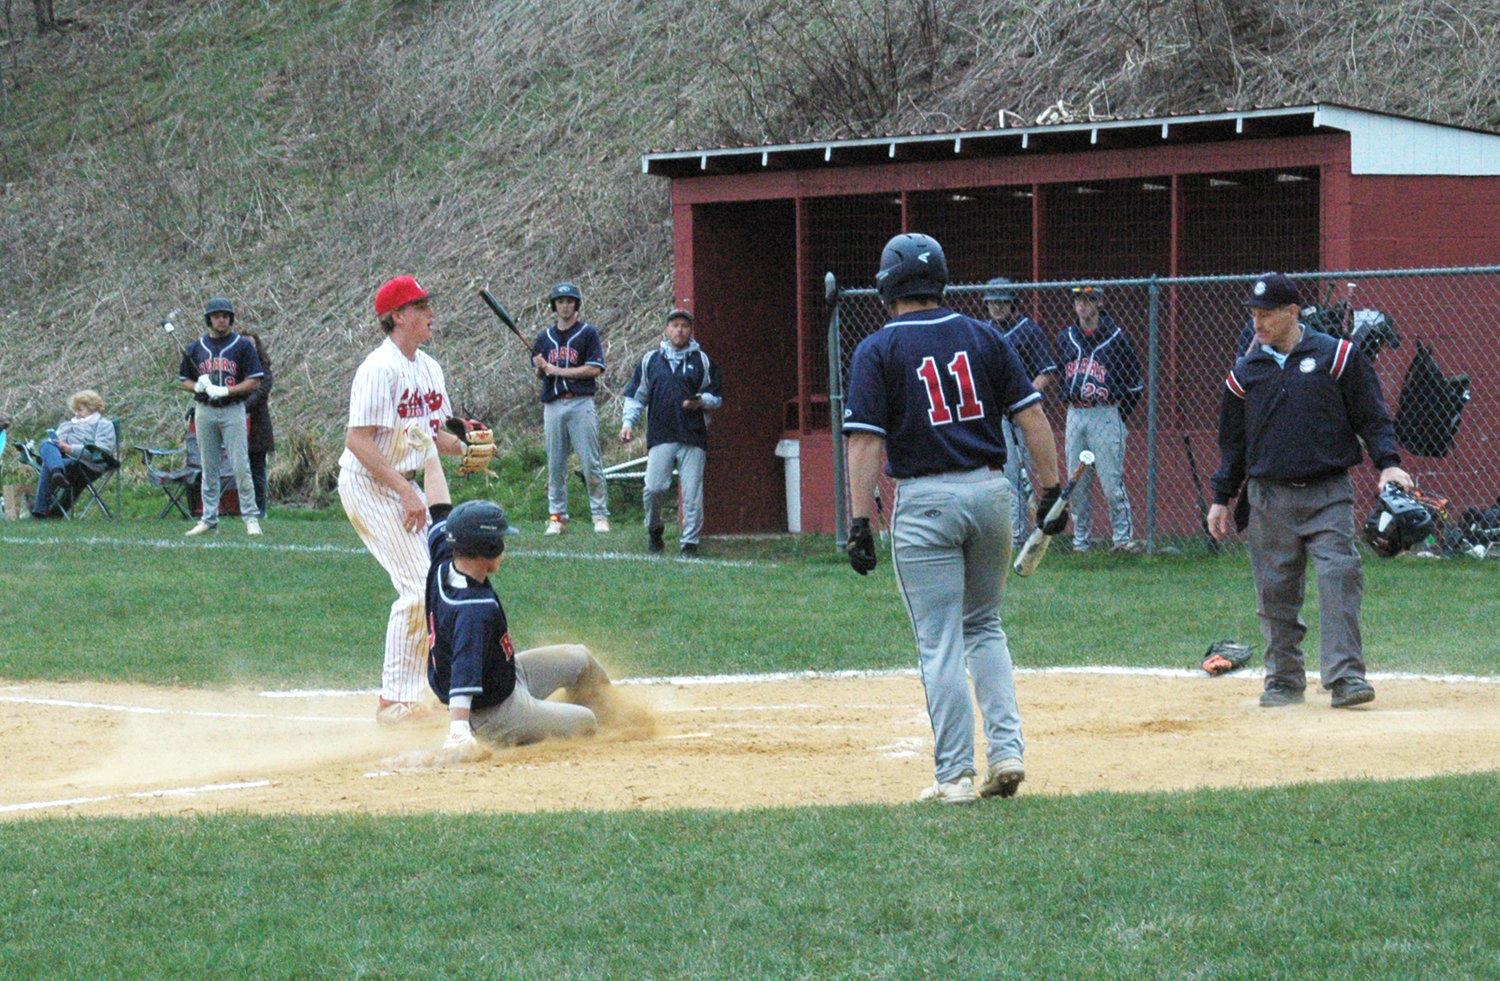 Tri-Valley’s Austin Hartman slides safely into home after taking off on a passed ball. The Bears beat the Indians 7-5.